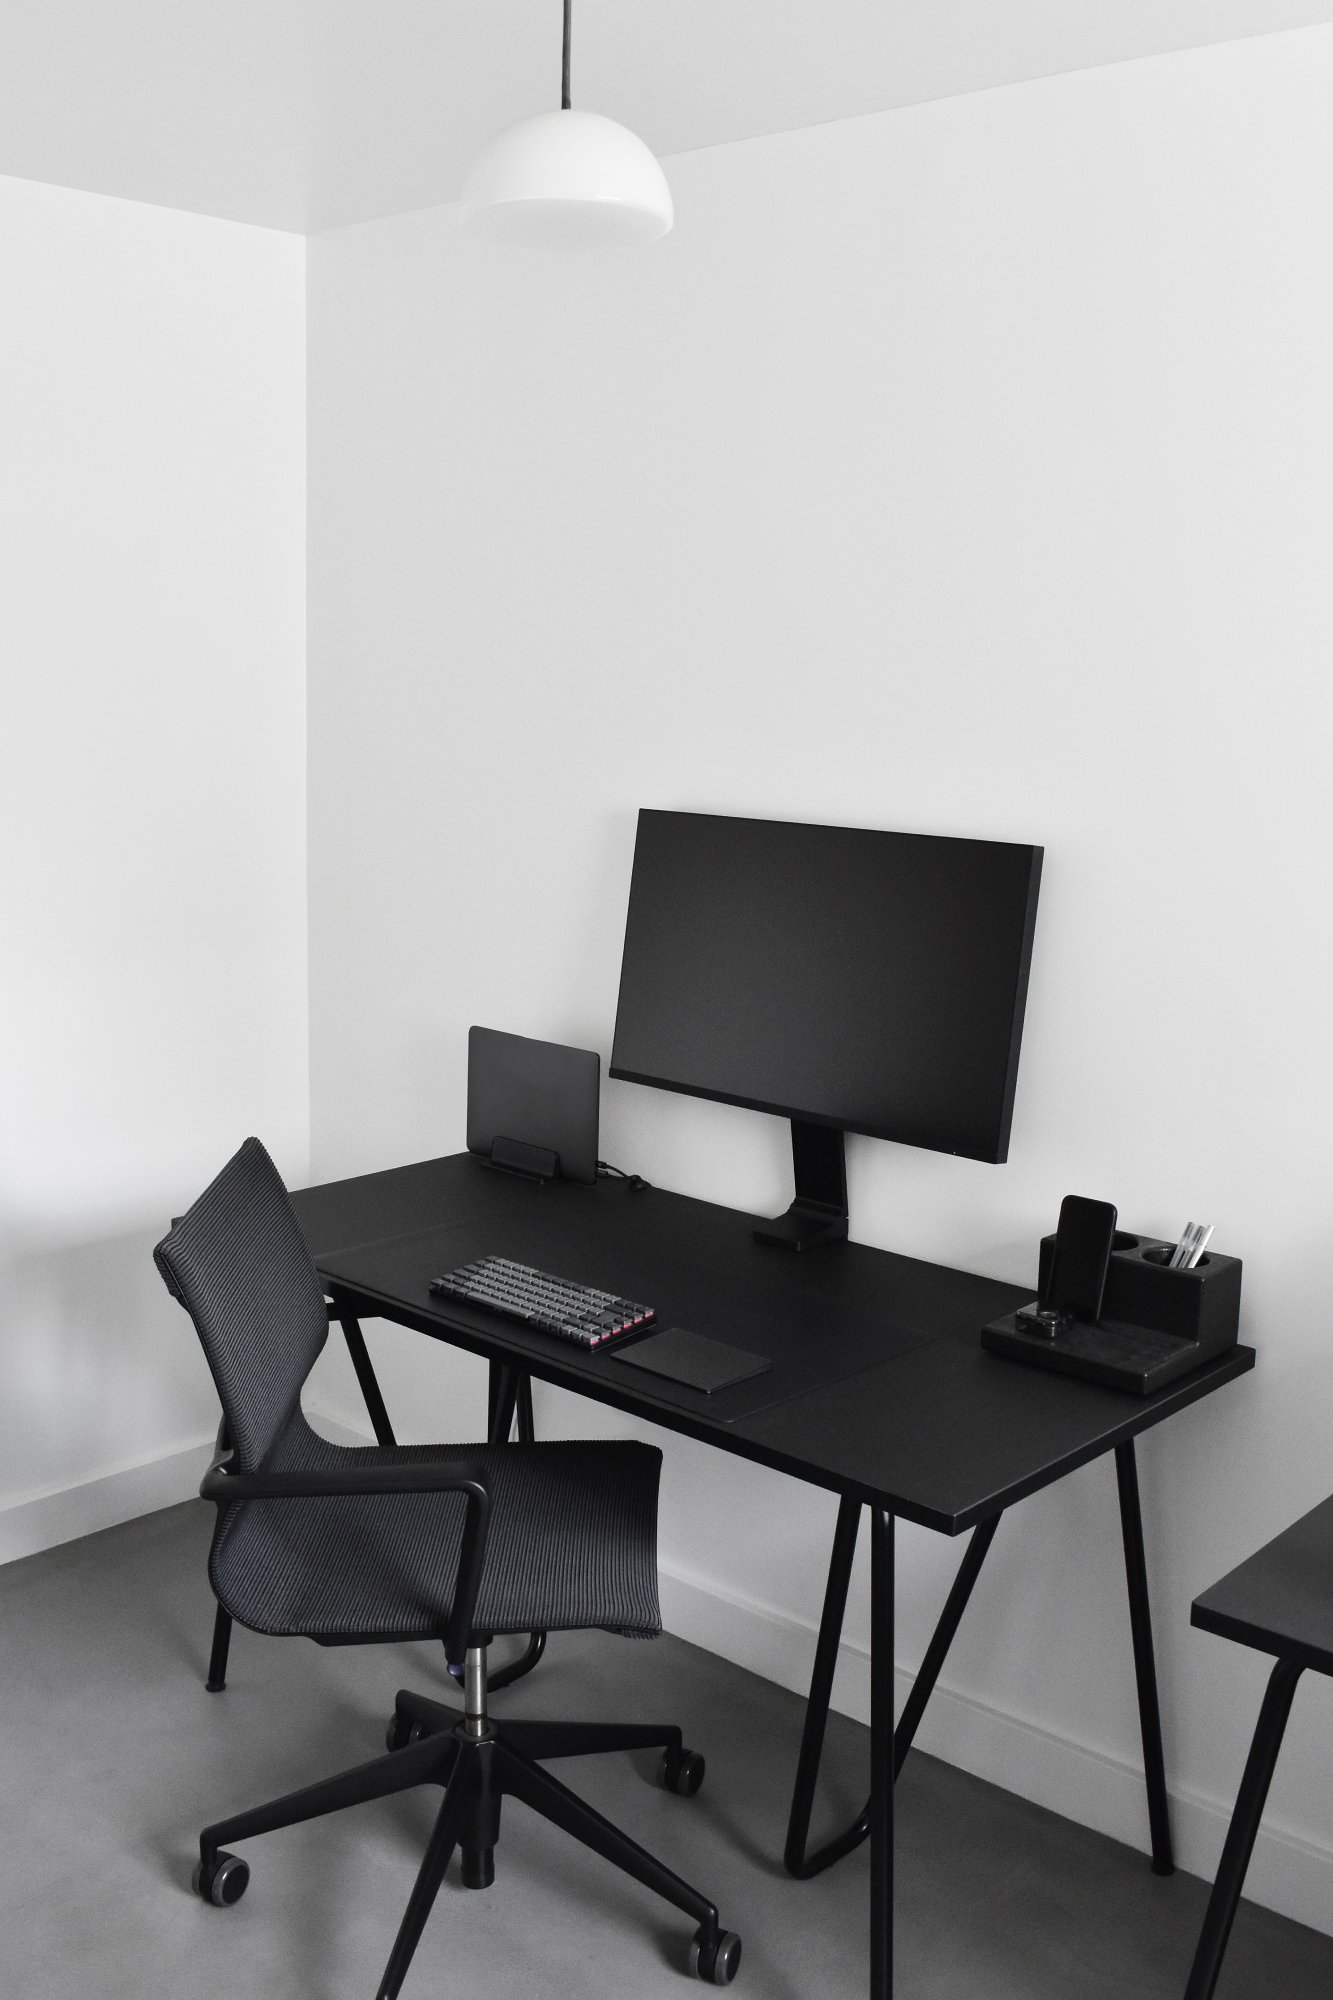 A minimalist black and white home office with a sleek black desk, ergonomic mesh chair, and contemporary desktop accessories under a simple pendant light